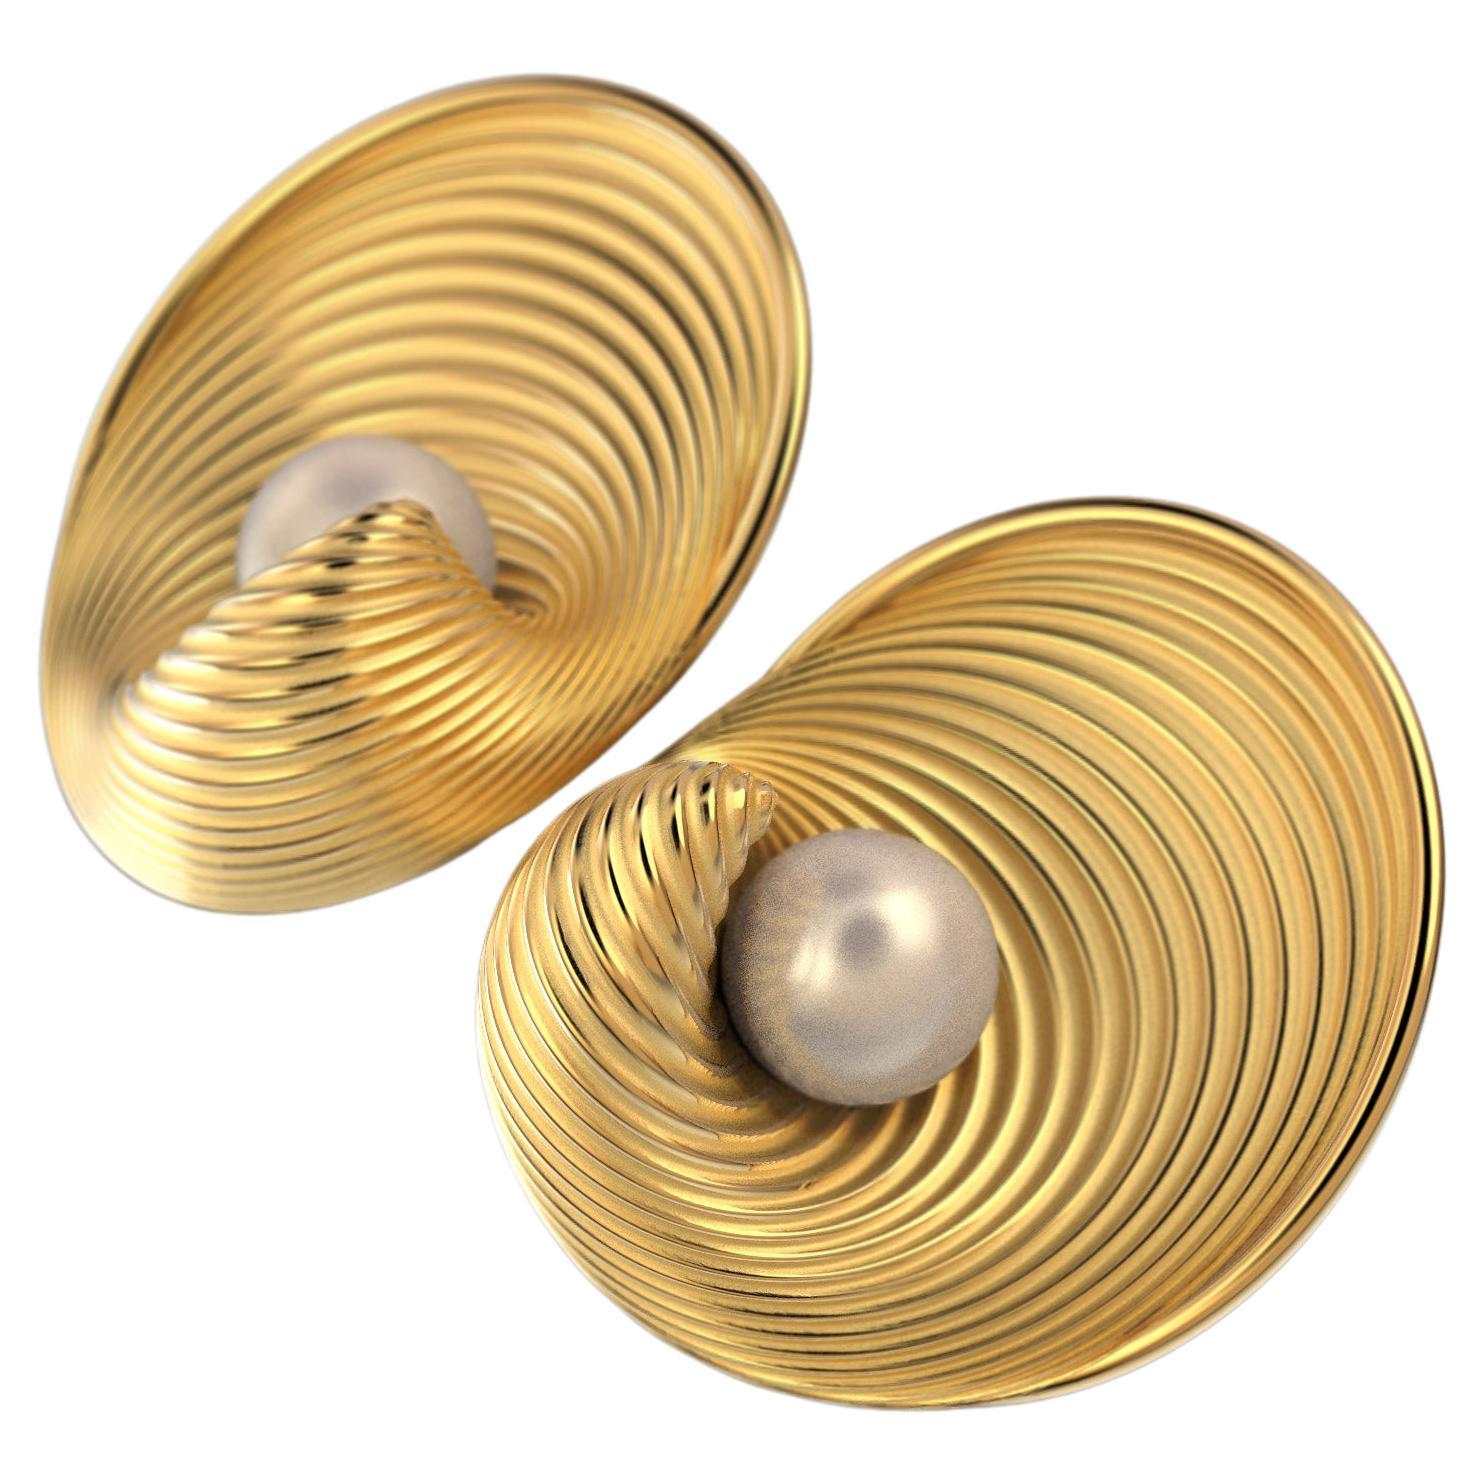 Made to order Akoya sea pearl earrings in genuine 14k solid gold made in Italy, white pearl earrings. Italian fine jewelry, modern gold earrings, 25 mm long stunning earrings with natural Akoya sea pearls, crafted in polished and raw solid gold 18k